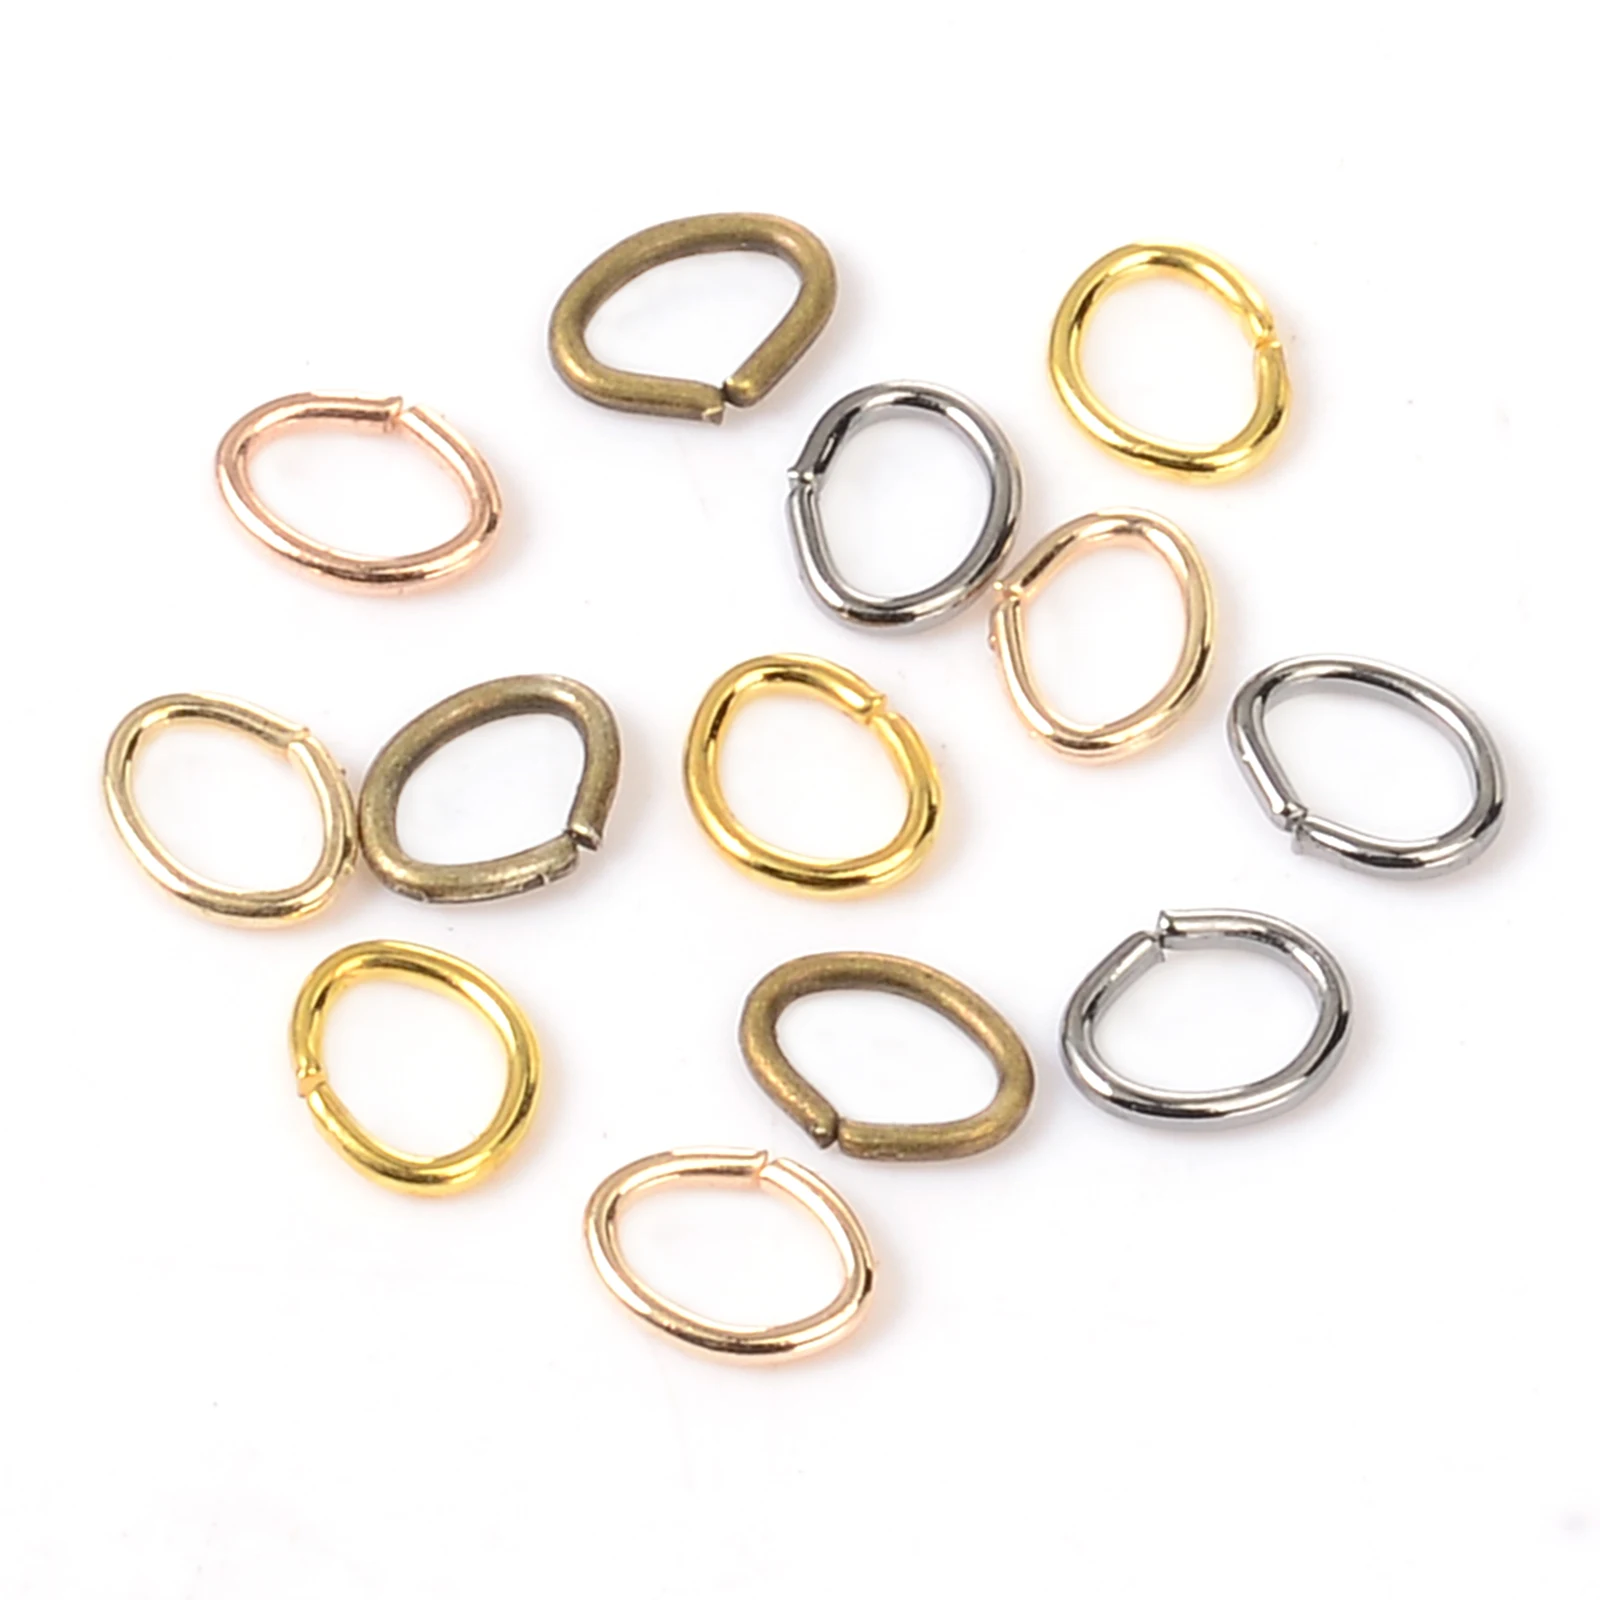 

300pcs/lot 5x4mm Plated Gold Color Metal Ring Oval Jump Ring Split Rings Connectors for DIY Jewelry Making Findings Accessories